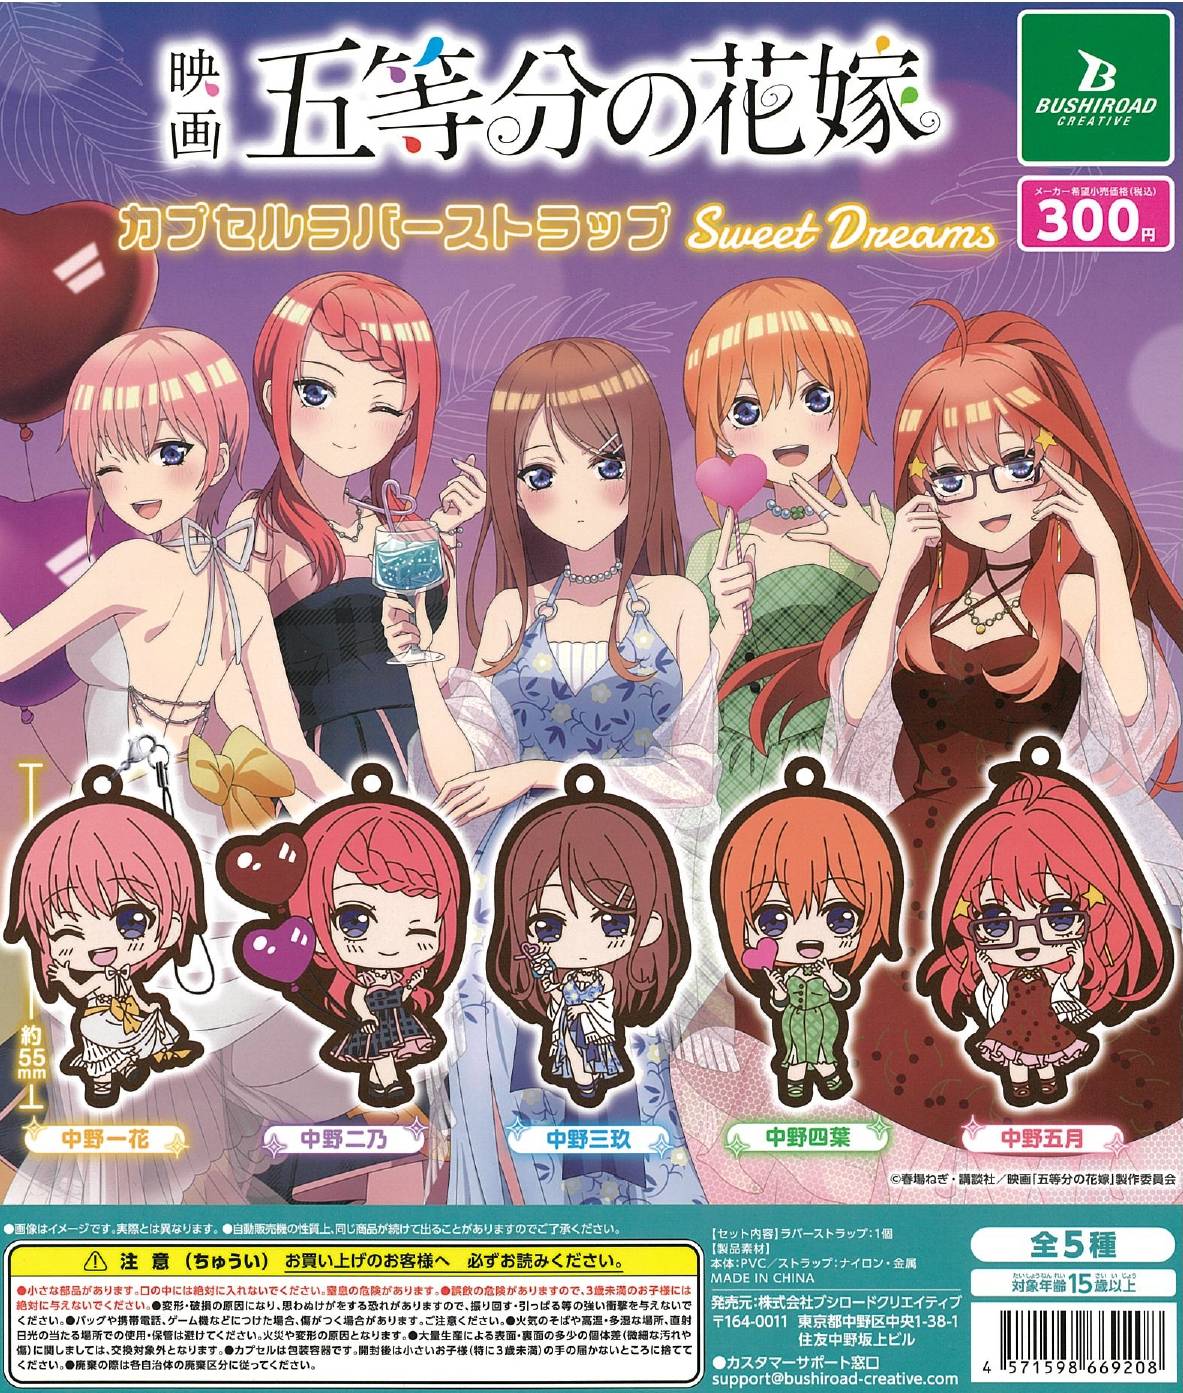 CP2593 The Quintessential Quintuplets Movie Capsule Rubber Strap Sweet Dreams